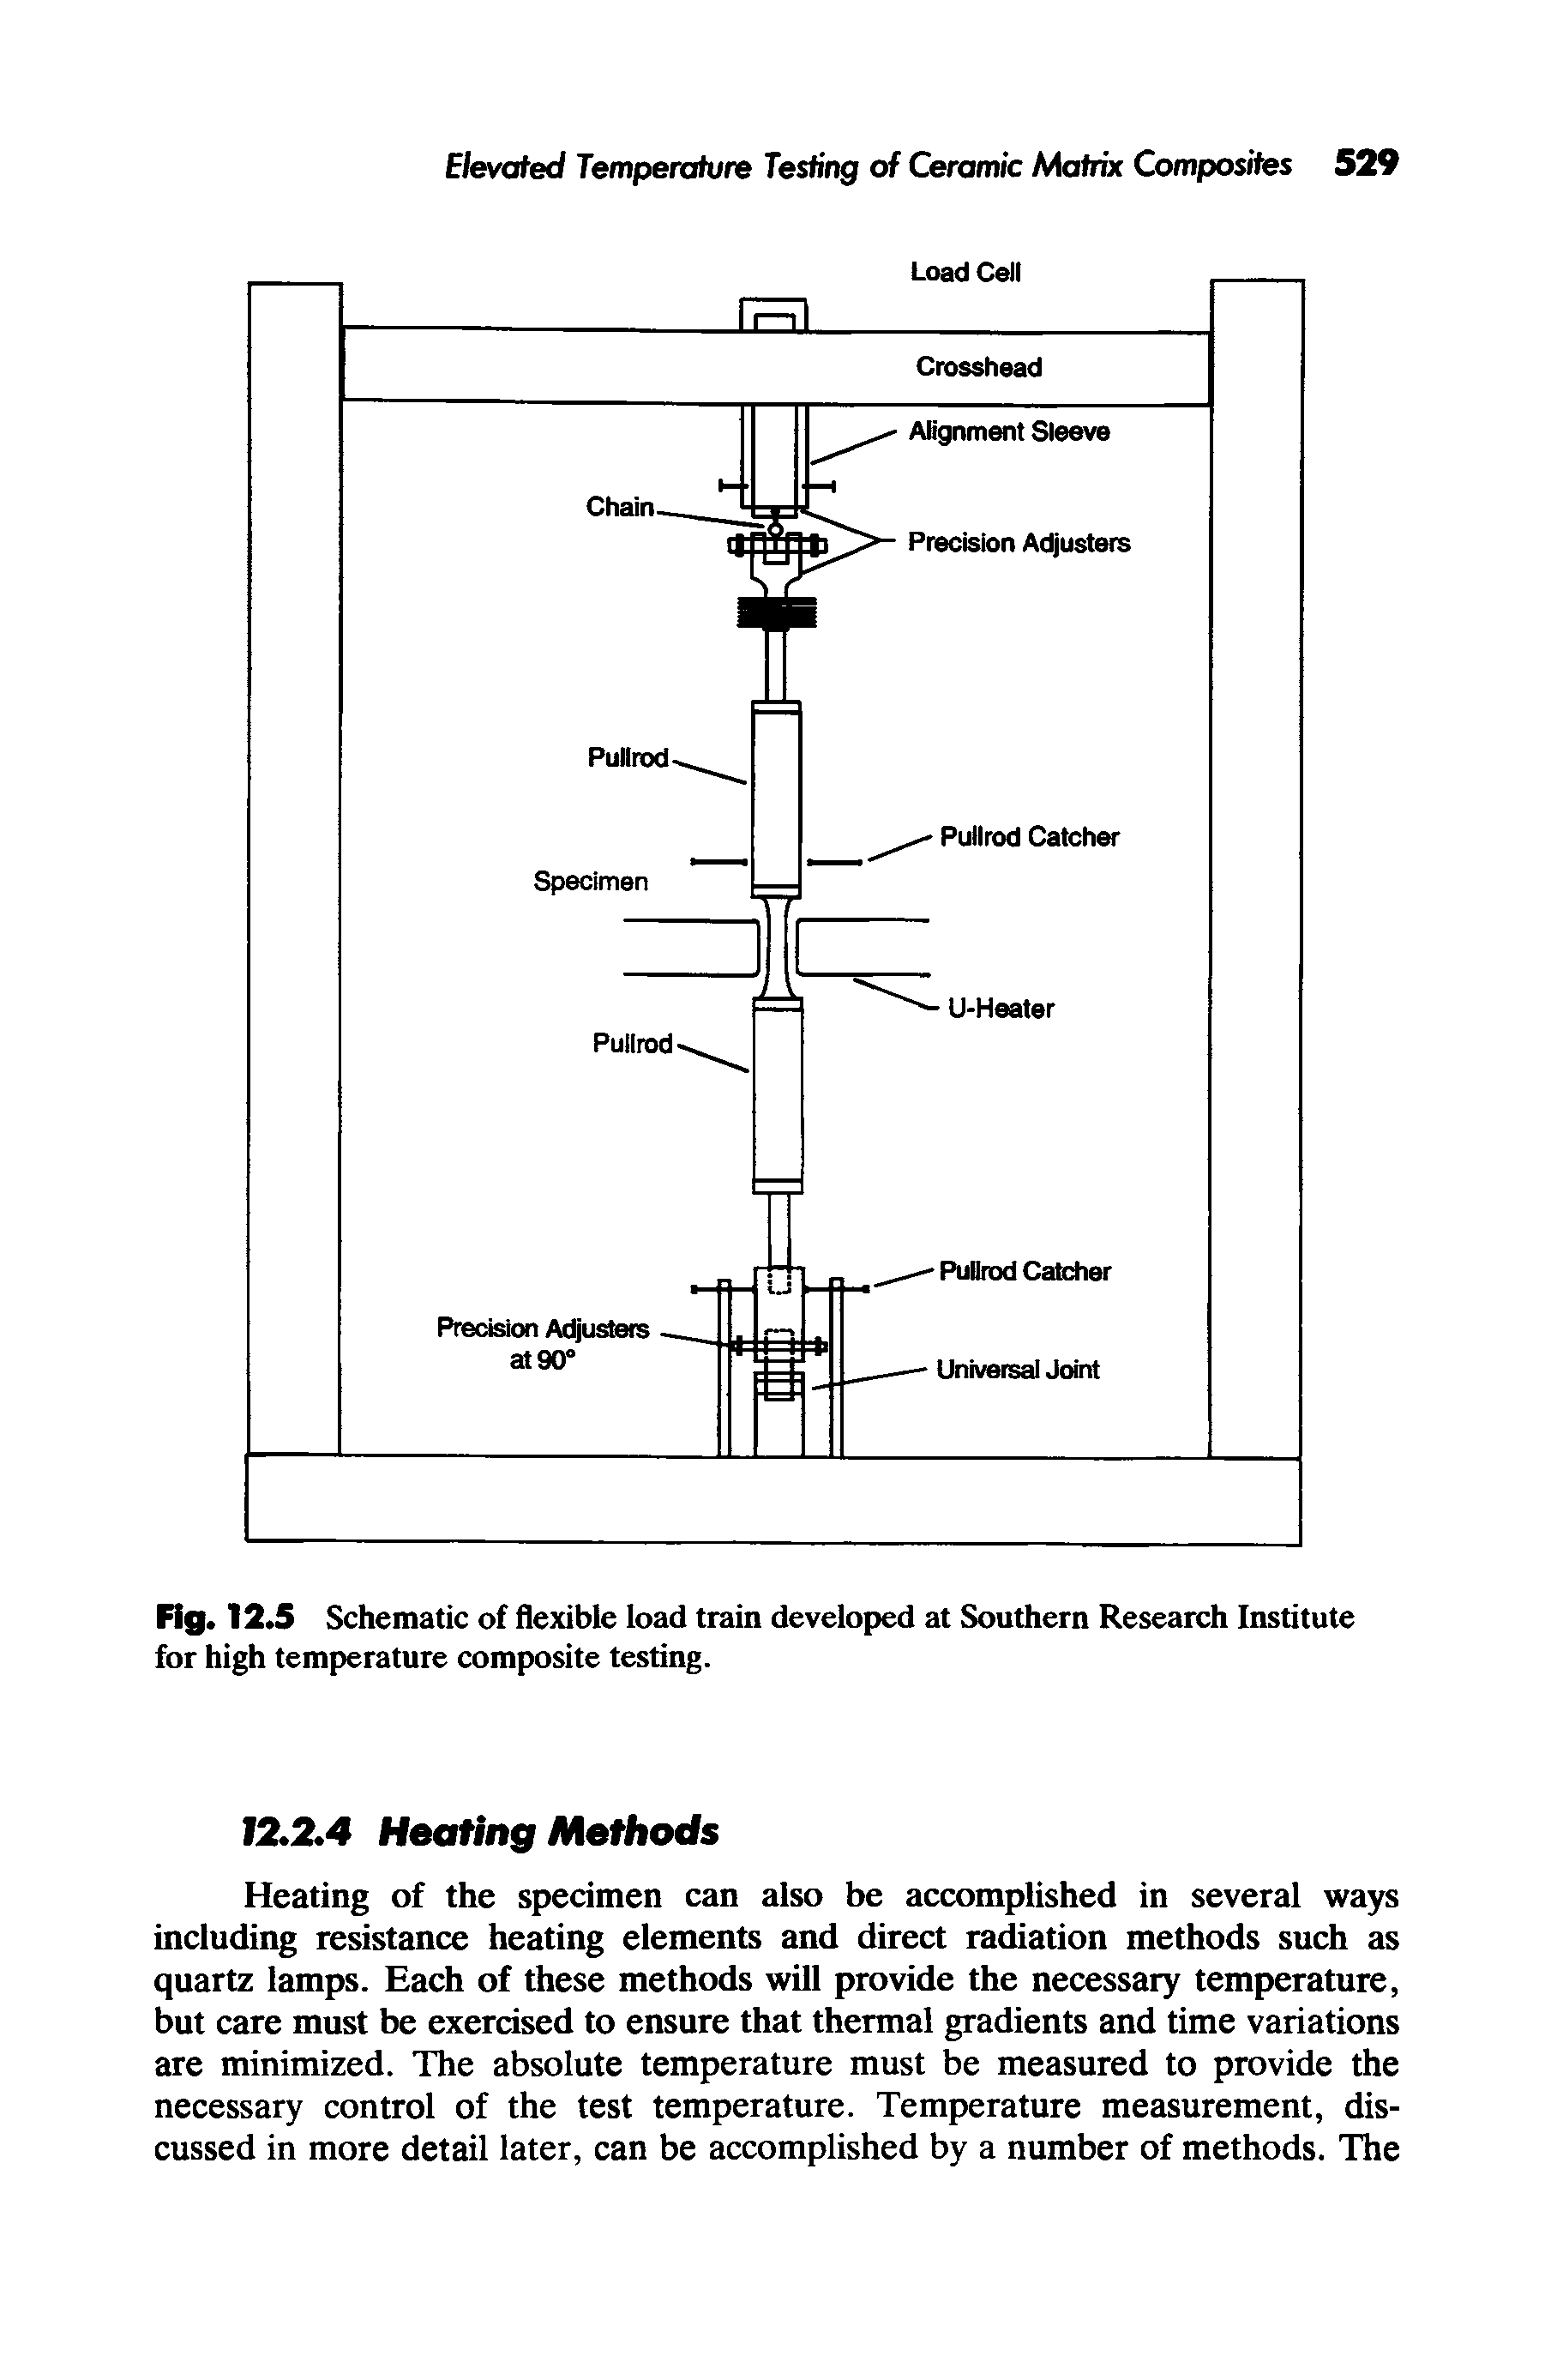 Fig. 12.5 Schematic of flexible load train developed at Southern Research Institute for high temperature composite testing.